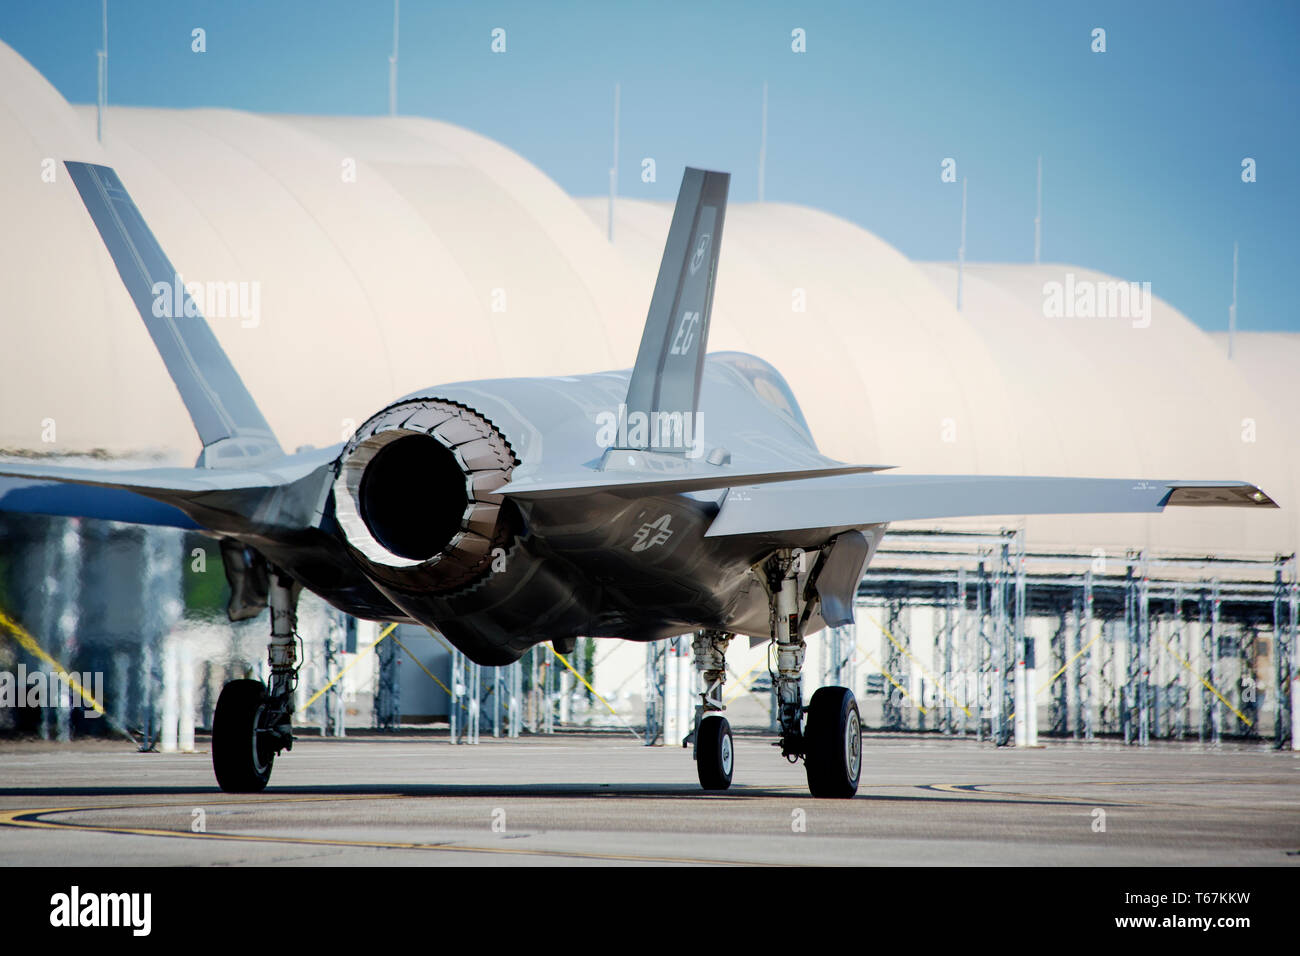 A F-35A Fighter Jet taxies at the Eglin Air Force Base in Florida. The F-35A is built for conventional take-off and landing. Stock Photo